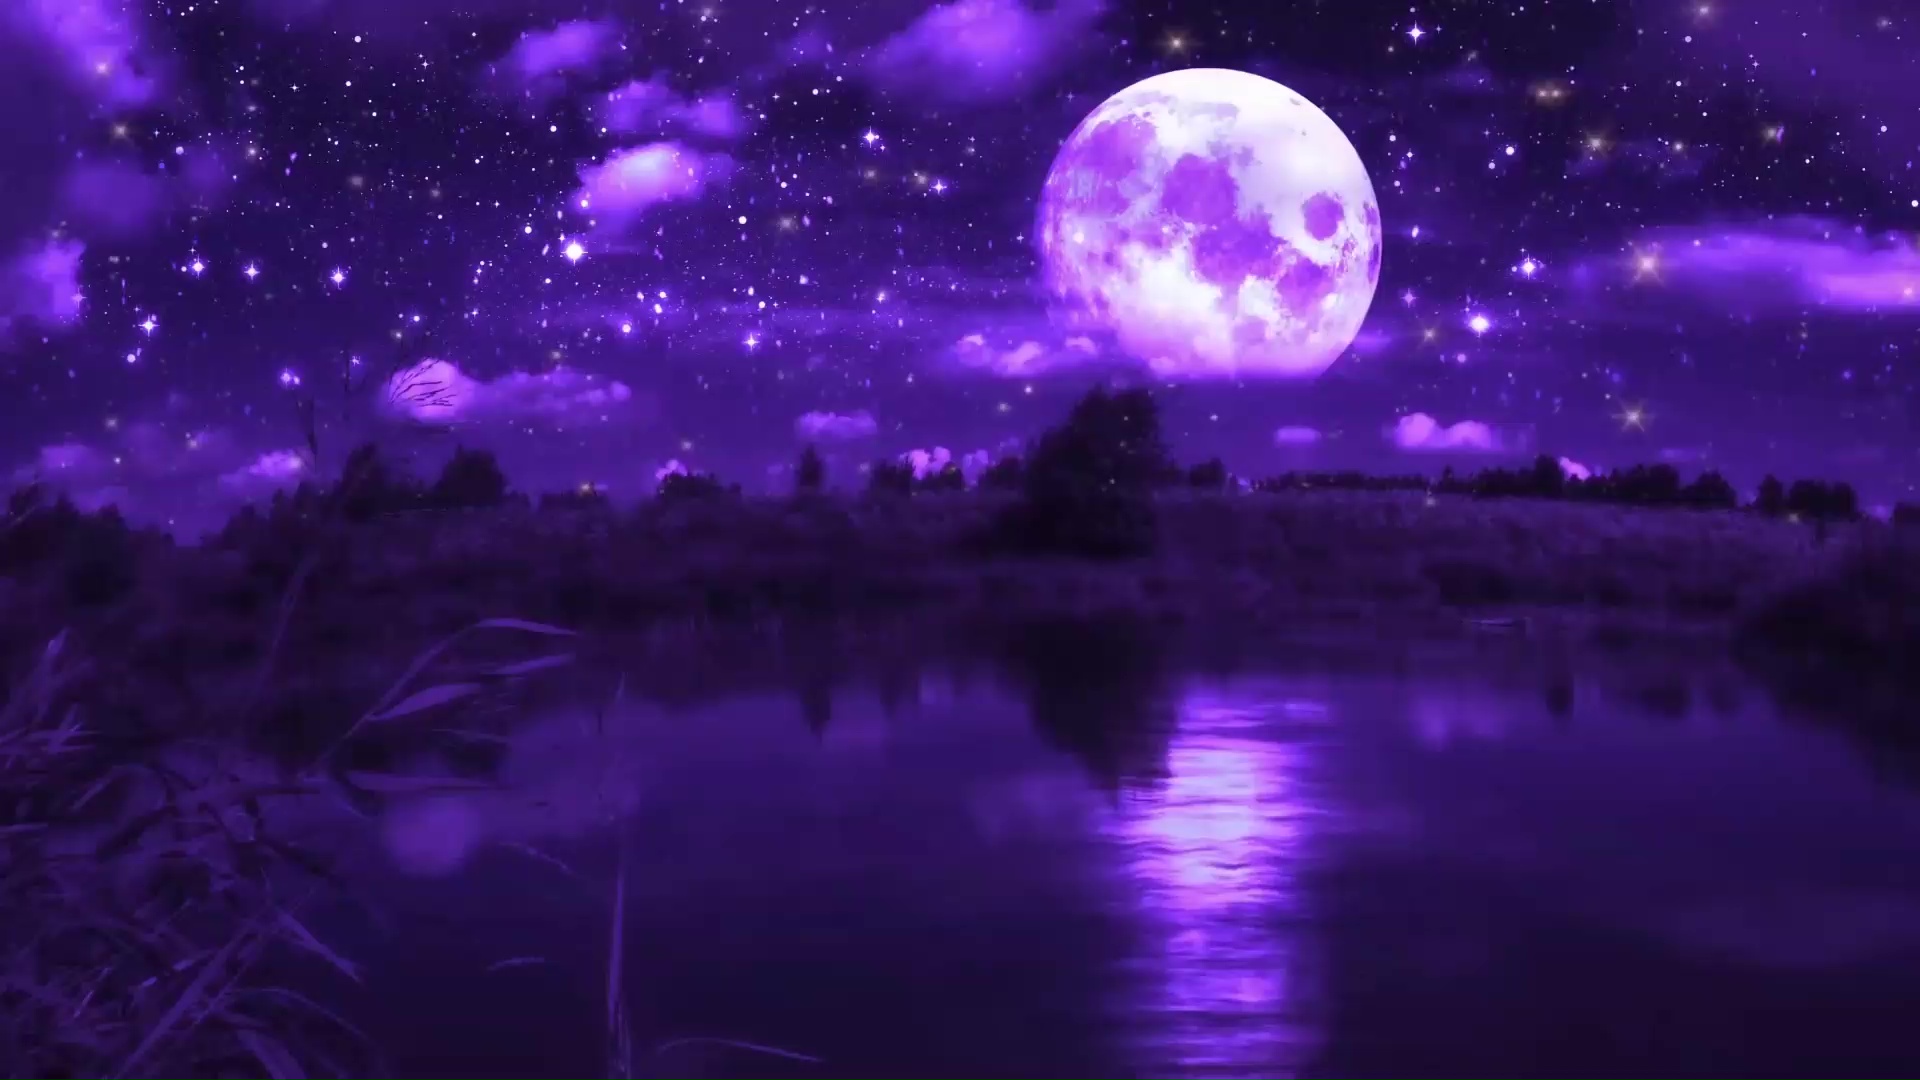 4K Purple Blue Mirror Show  Live Wallpaper  AAvfx  Wide Screen 219  Motion Background  YouTube